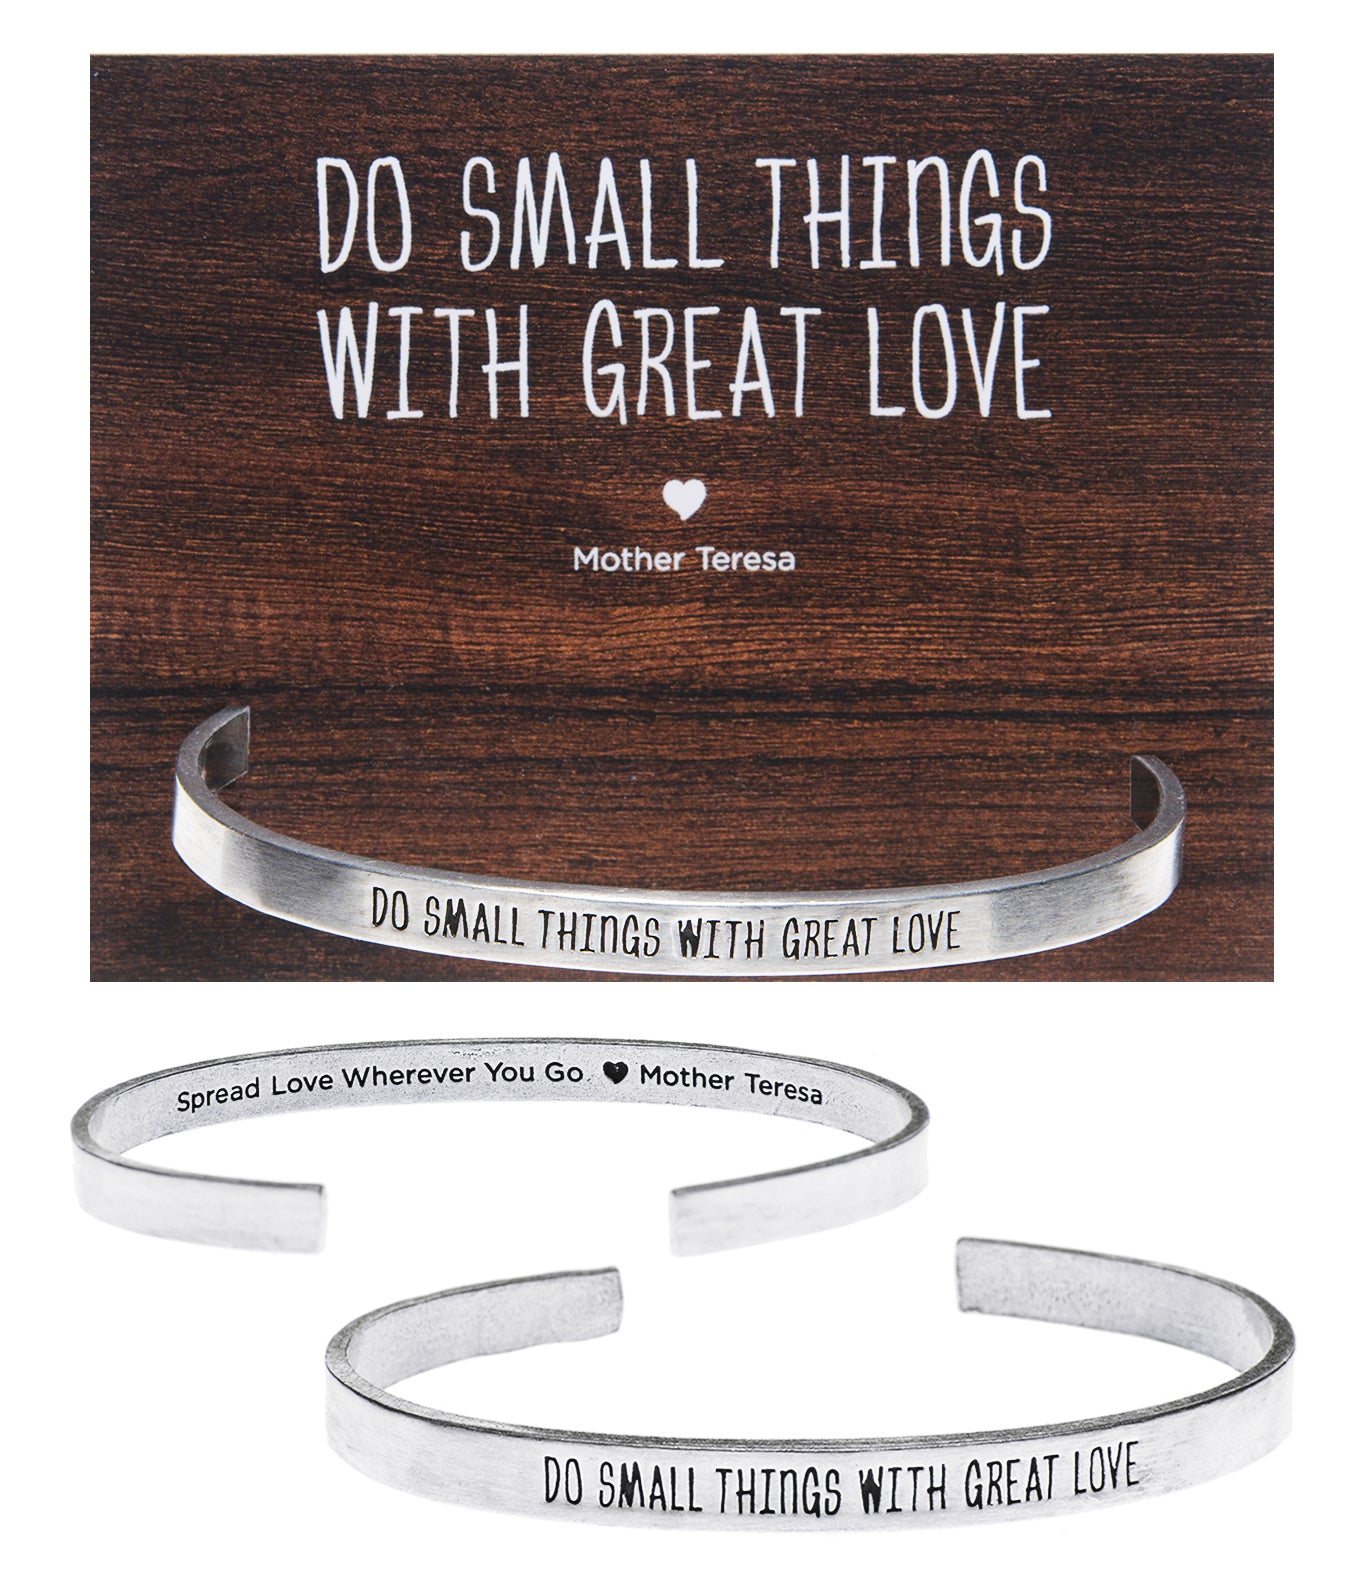 Do Small Things with Great Love Quotable Cuff Bracelet - Mother Teresa with backer card